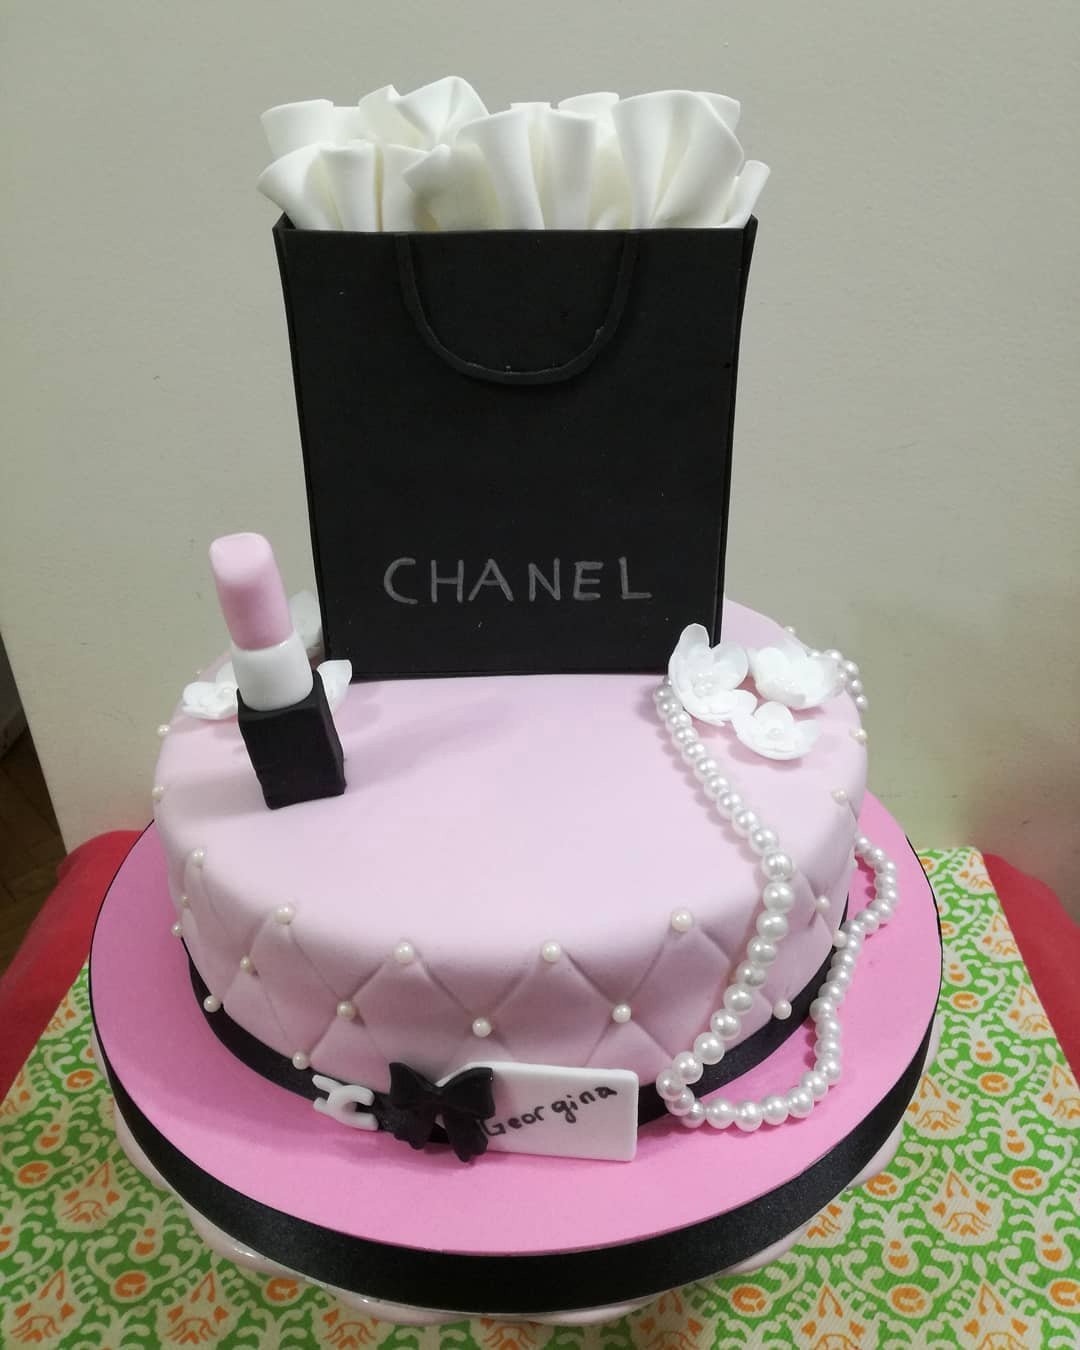 The Baking Cart - Louis Vuitton heel, Gucci bag, Chanel perfume and MAC  lipstick! Classy and fabulous birthday cake!